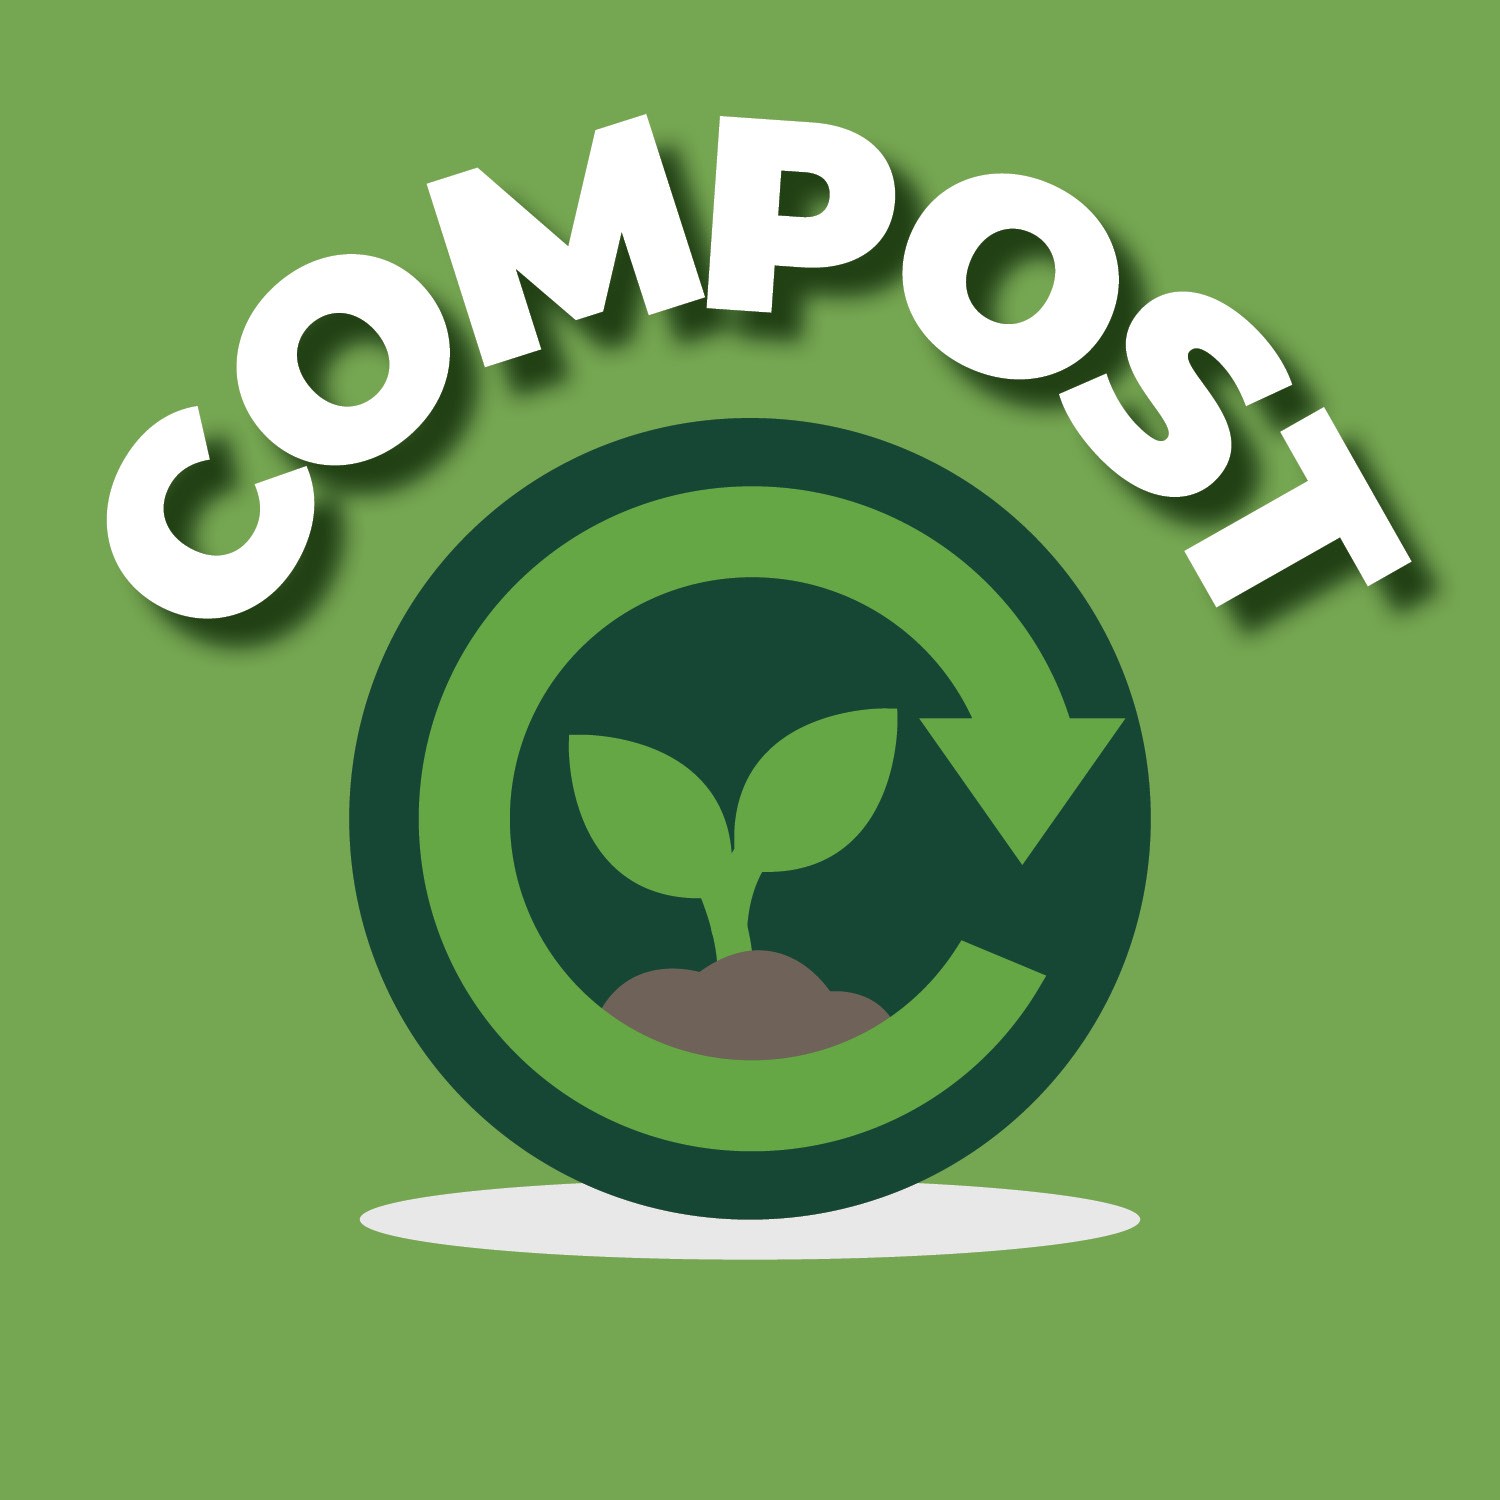 A image with a growing plant and an arrow circling it with the word "compost" above it.